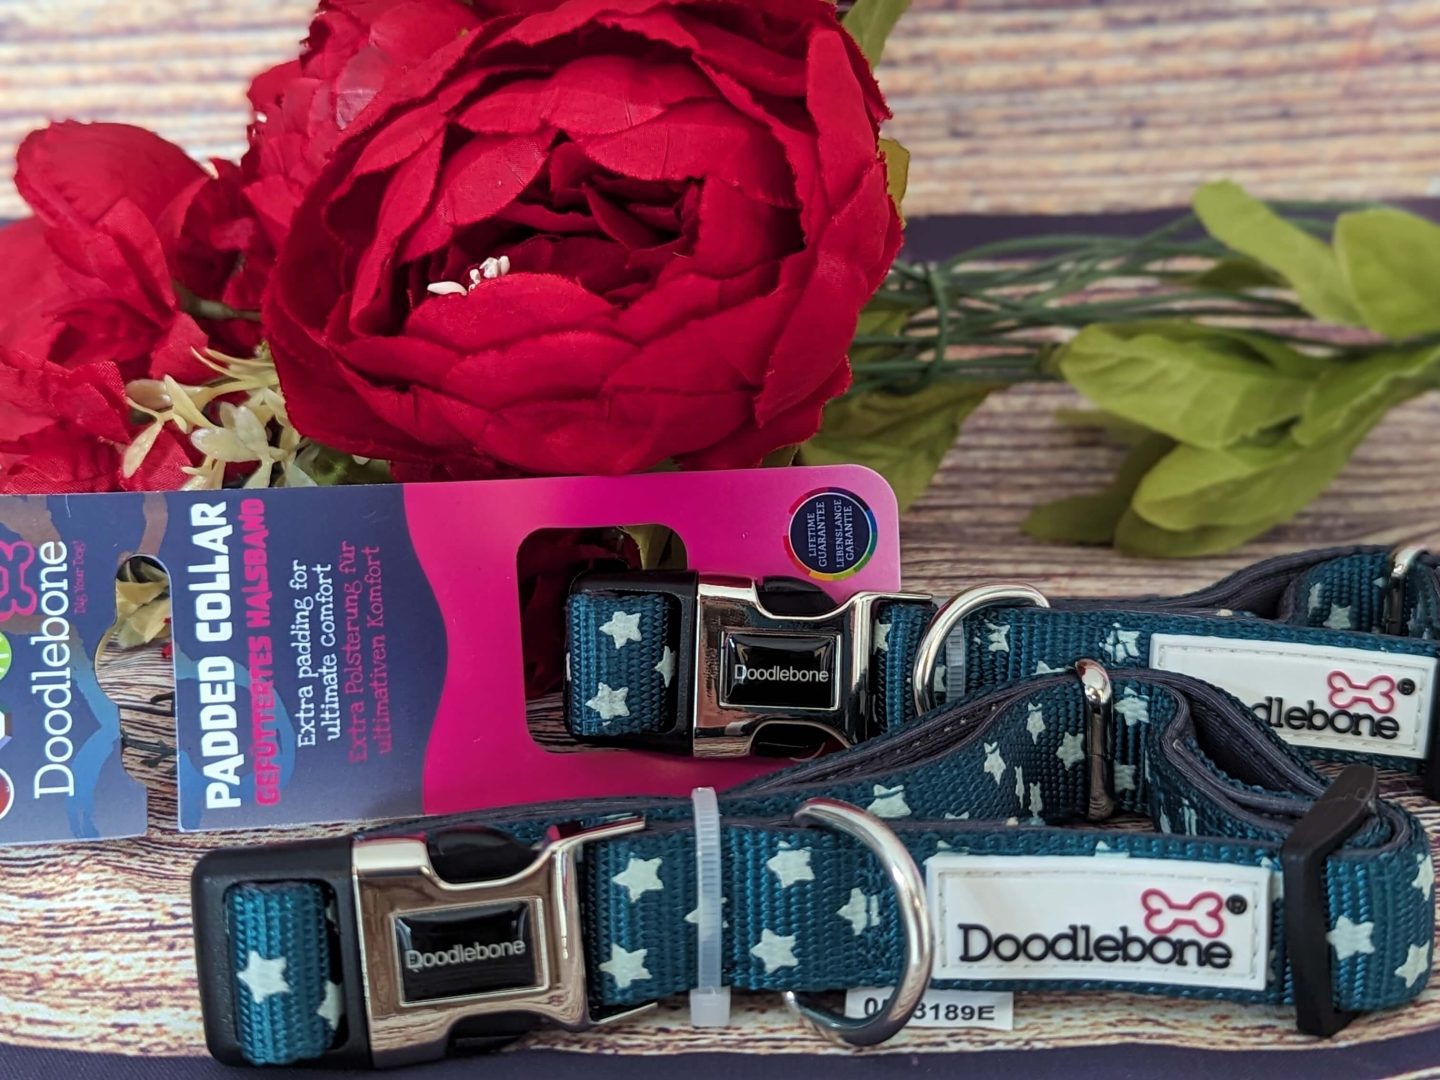 Turquoise doodlebone dog collars with white stars displayed on a wooden backdrop beside red flowers